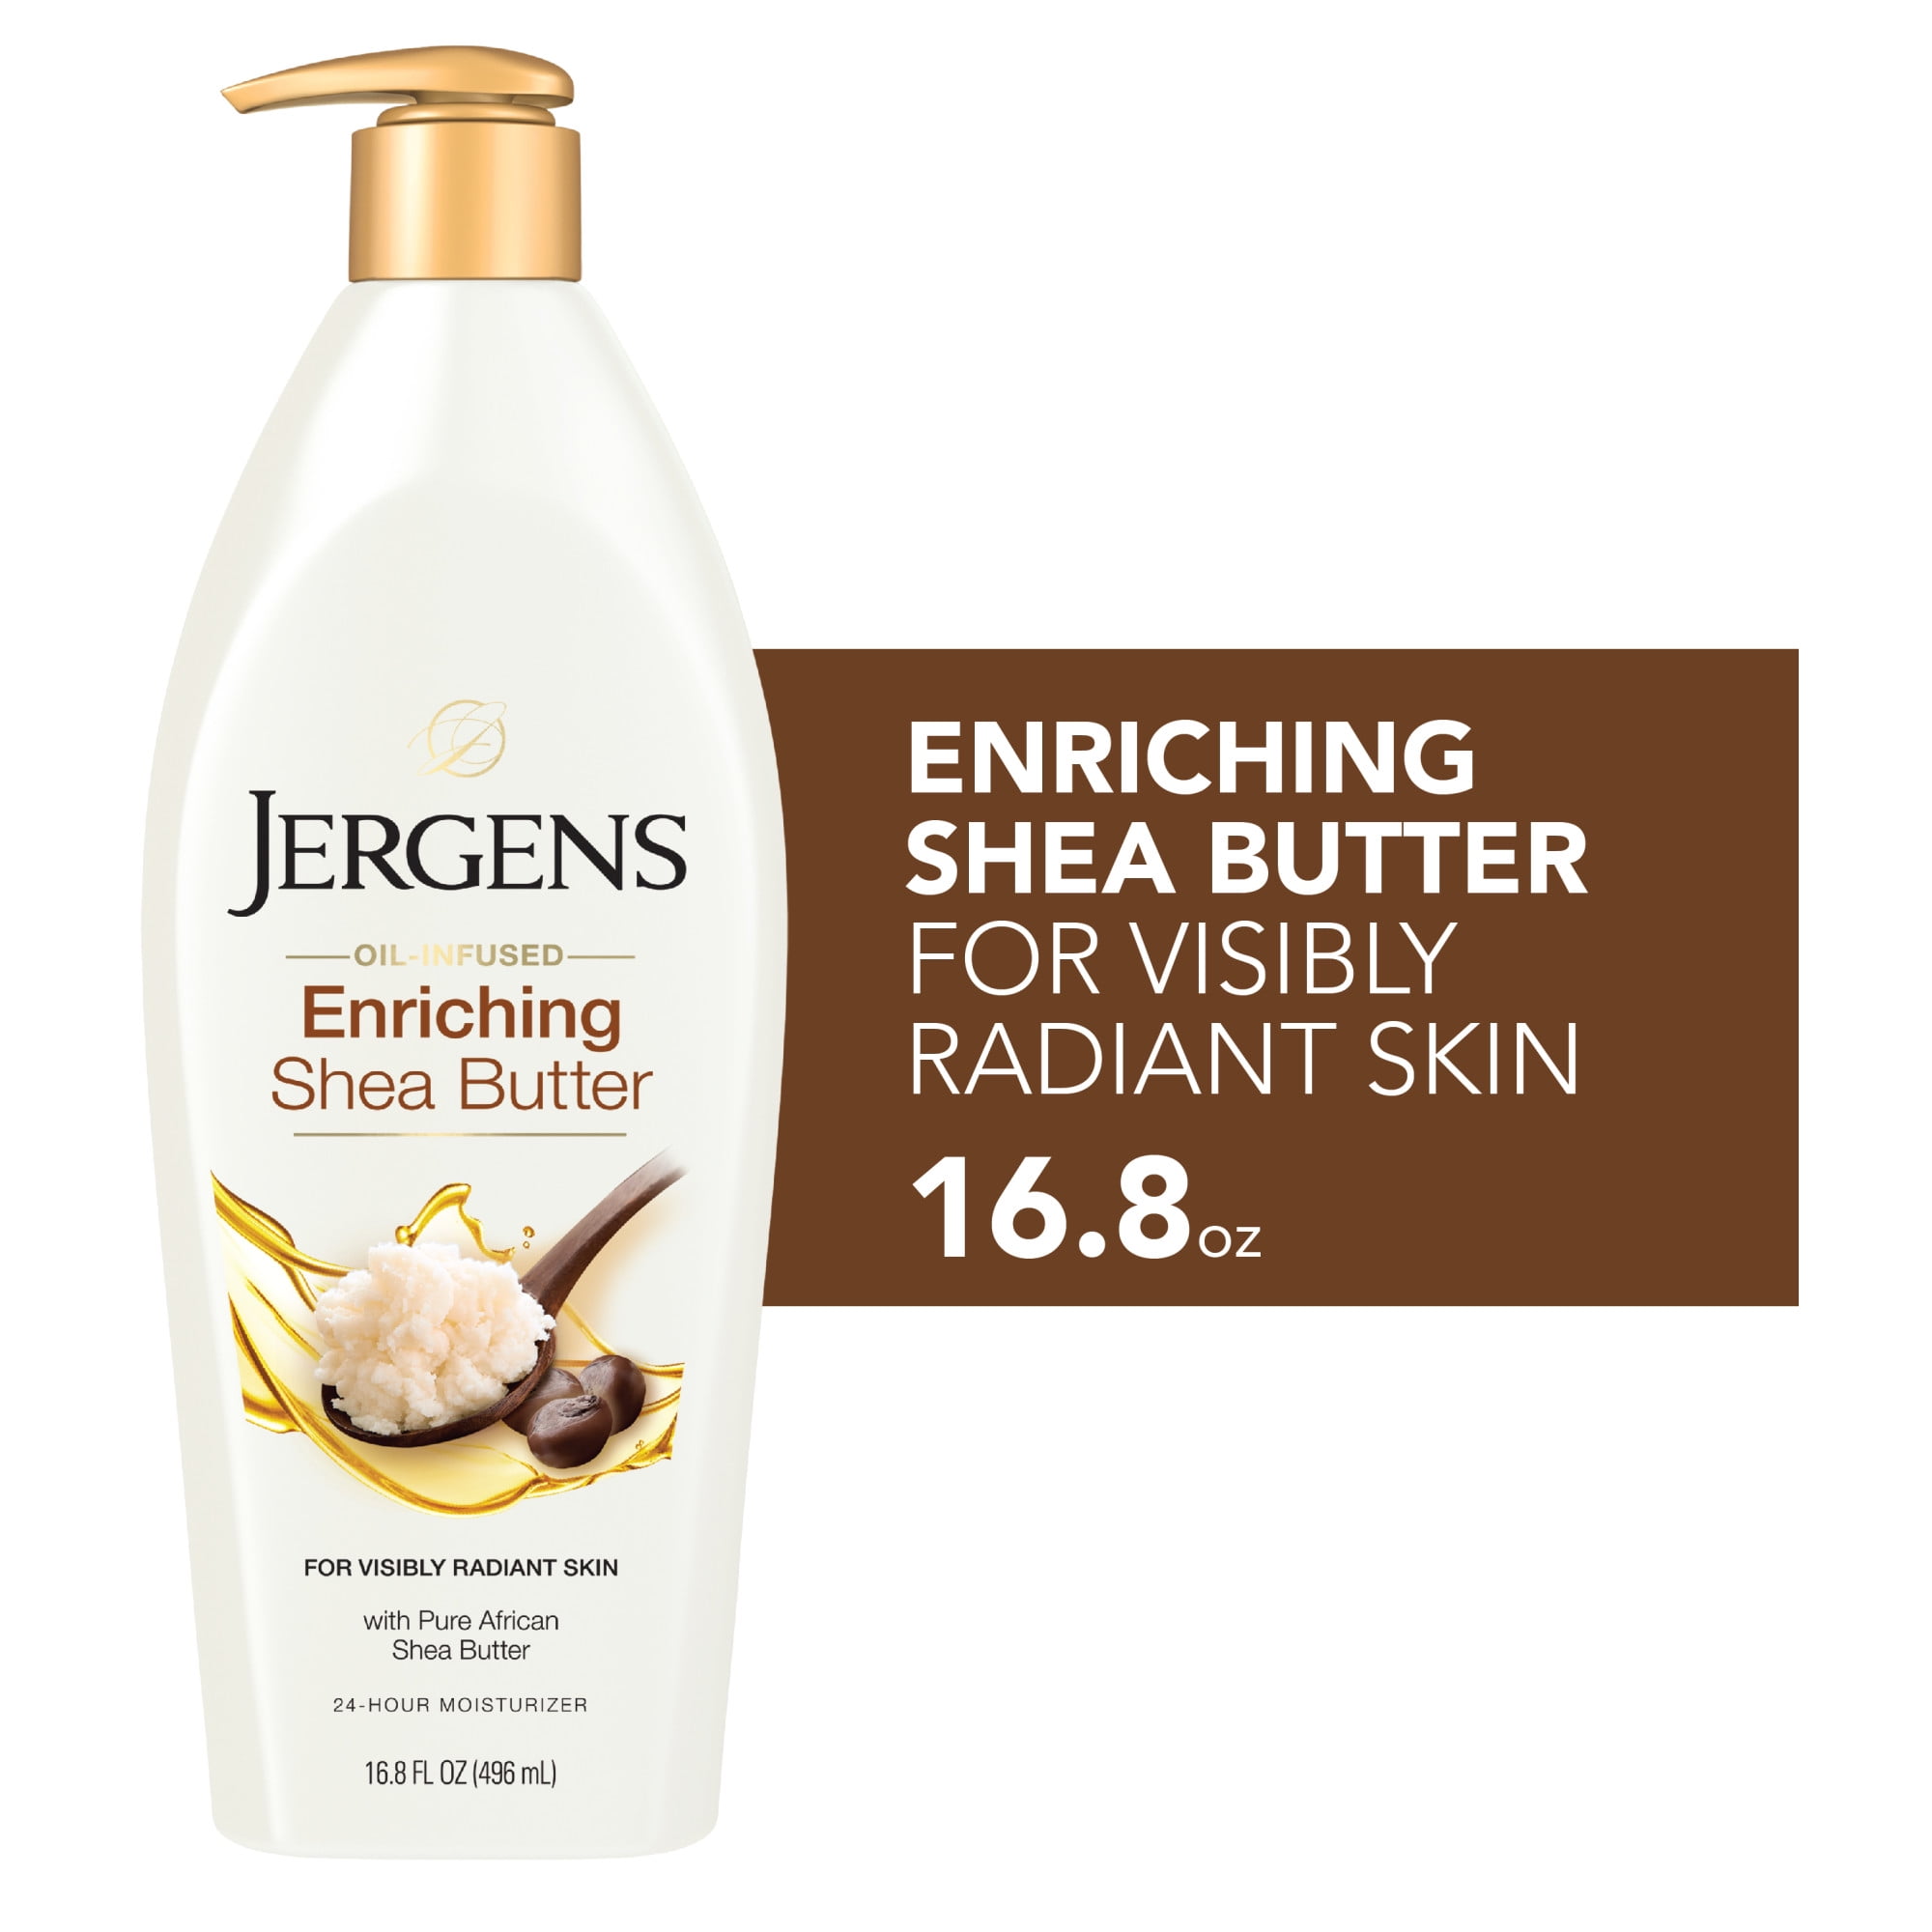 het winkelcentrum plan Bier Jergens Hand and Body Lotion, Shea Butter Deep Conditioning Body Lotion  with Pure African Shea Butter for Visibly Radiant Skin, 16.8 Oz -  Walmart.com